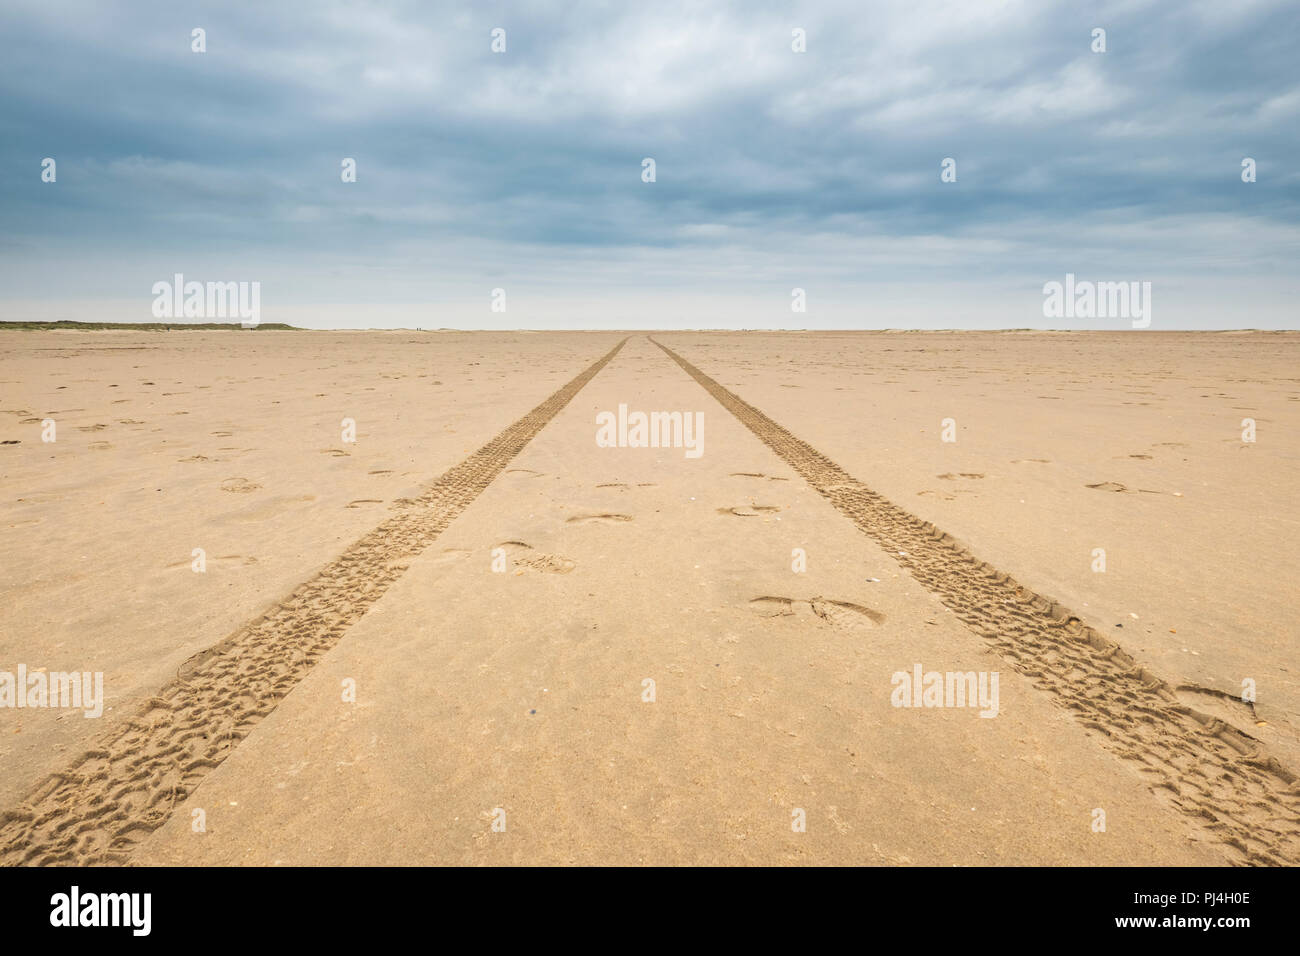 car tires print in the sand on a deserted cloudy beach and leave tire tracks behind towards the horizon Stock Photo